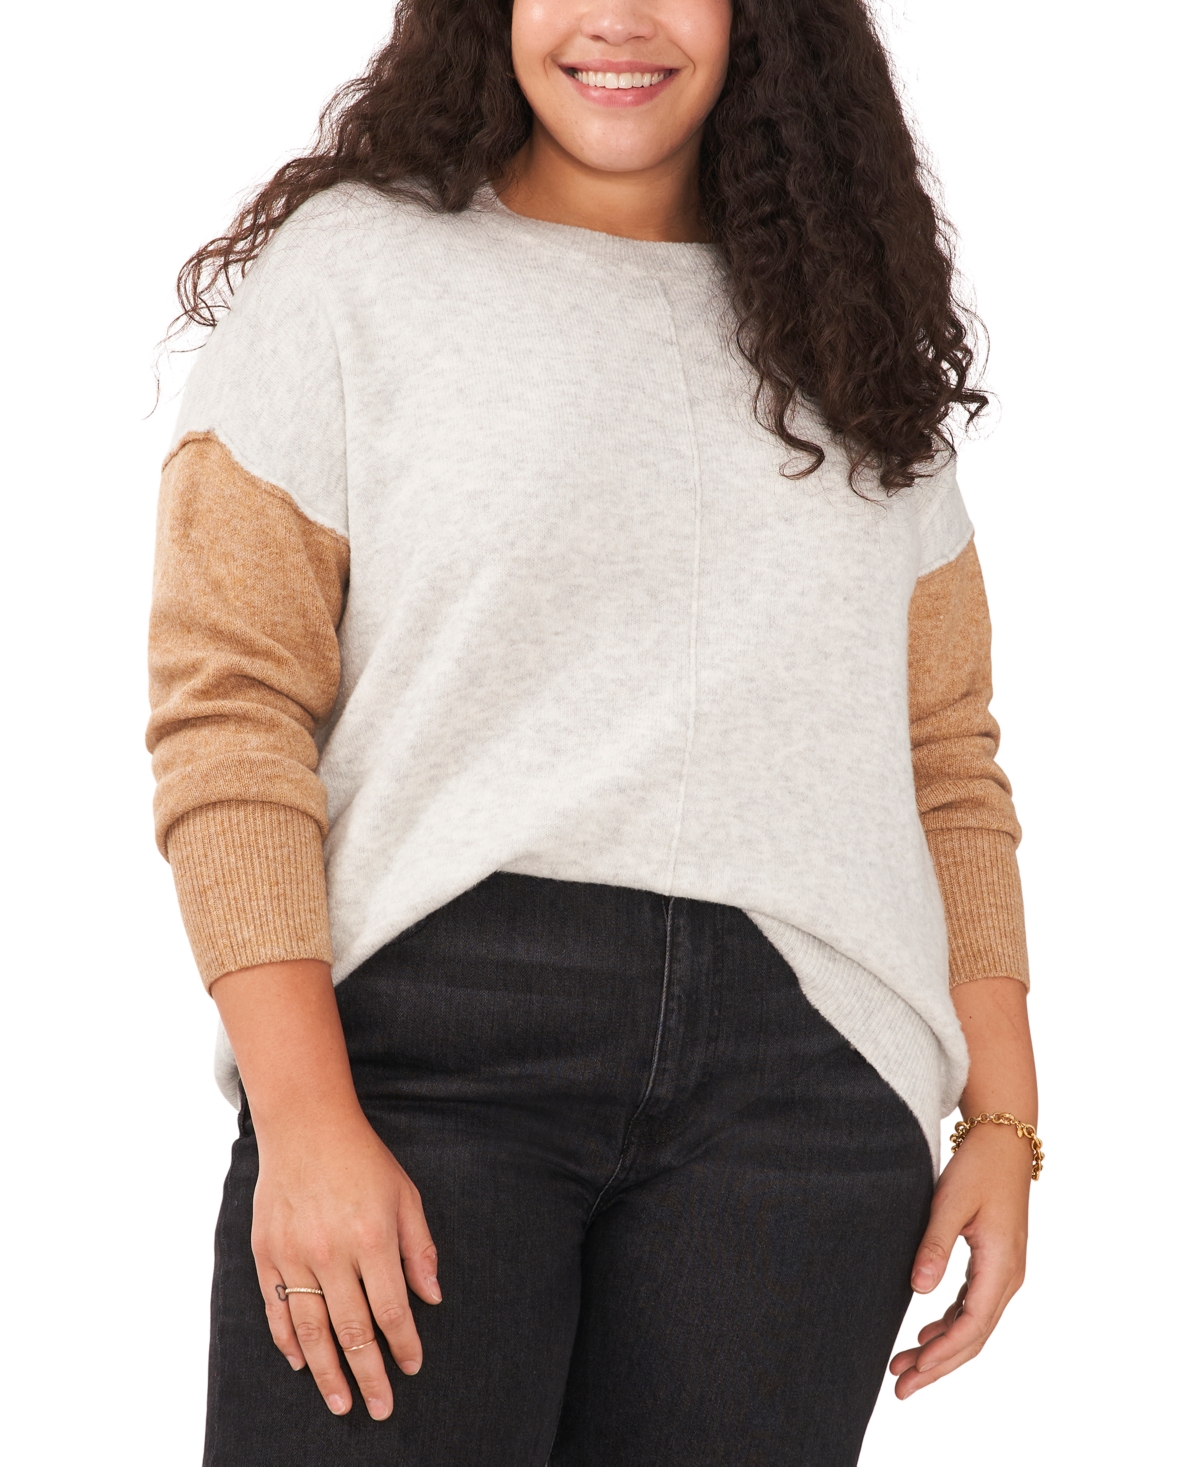 Vince Camuto Plus Size Colorblocked Sweater